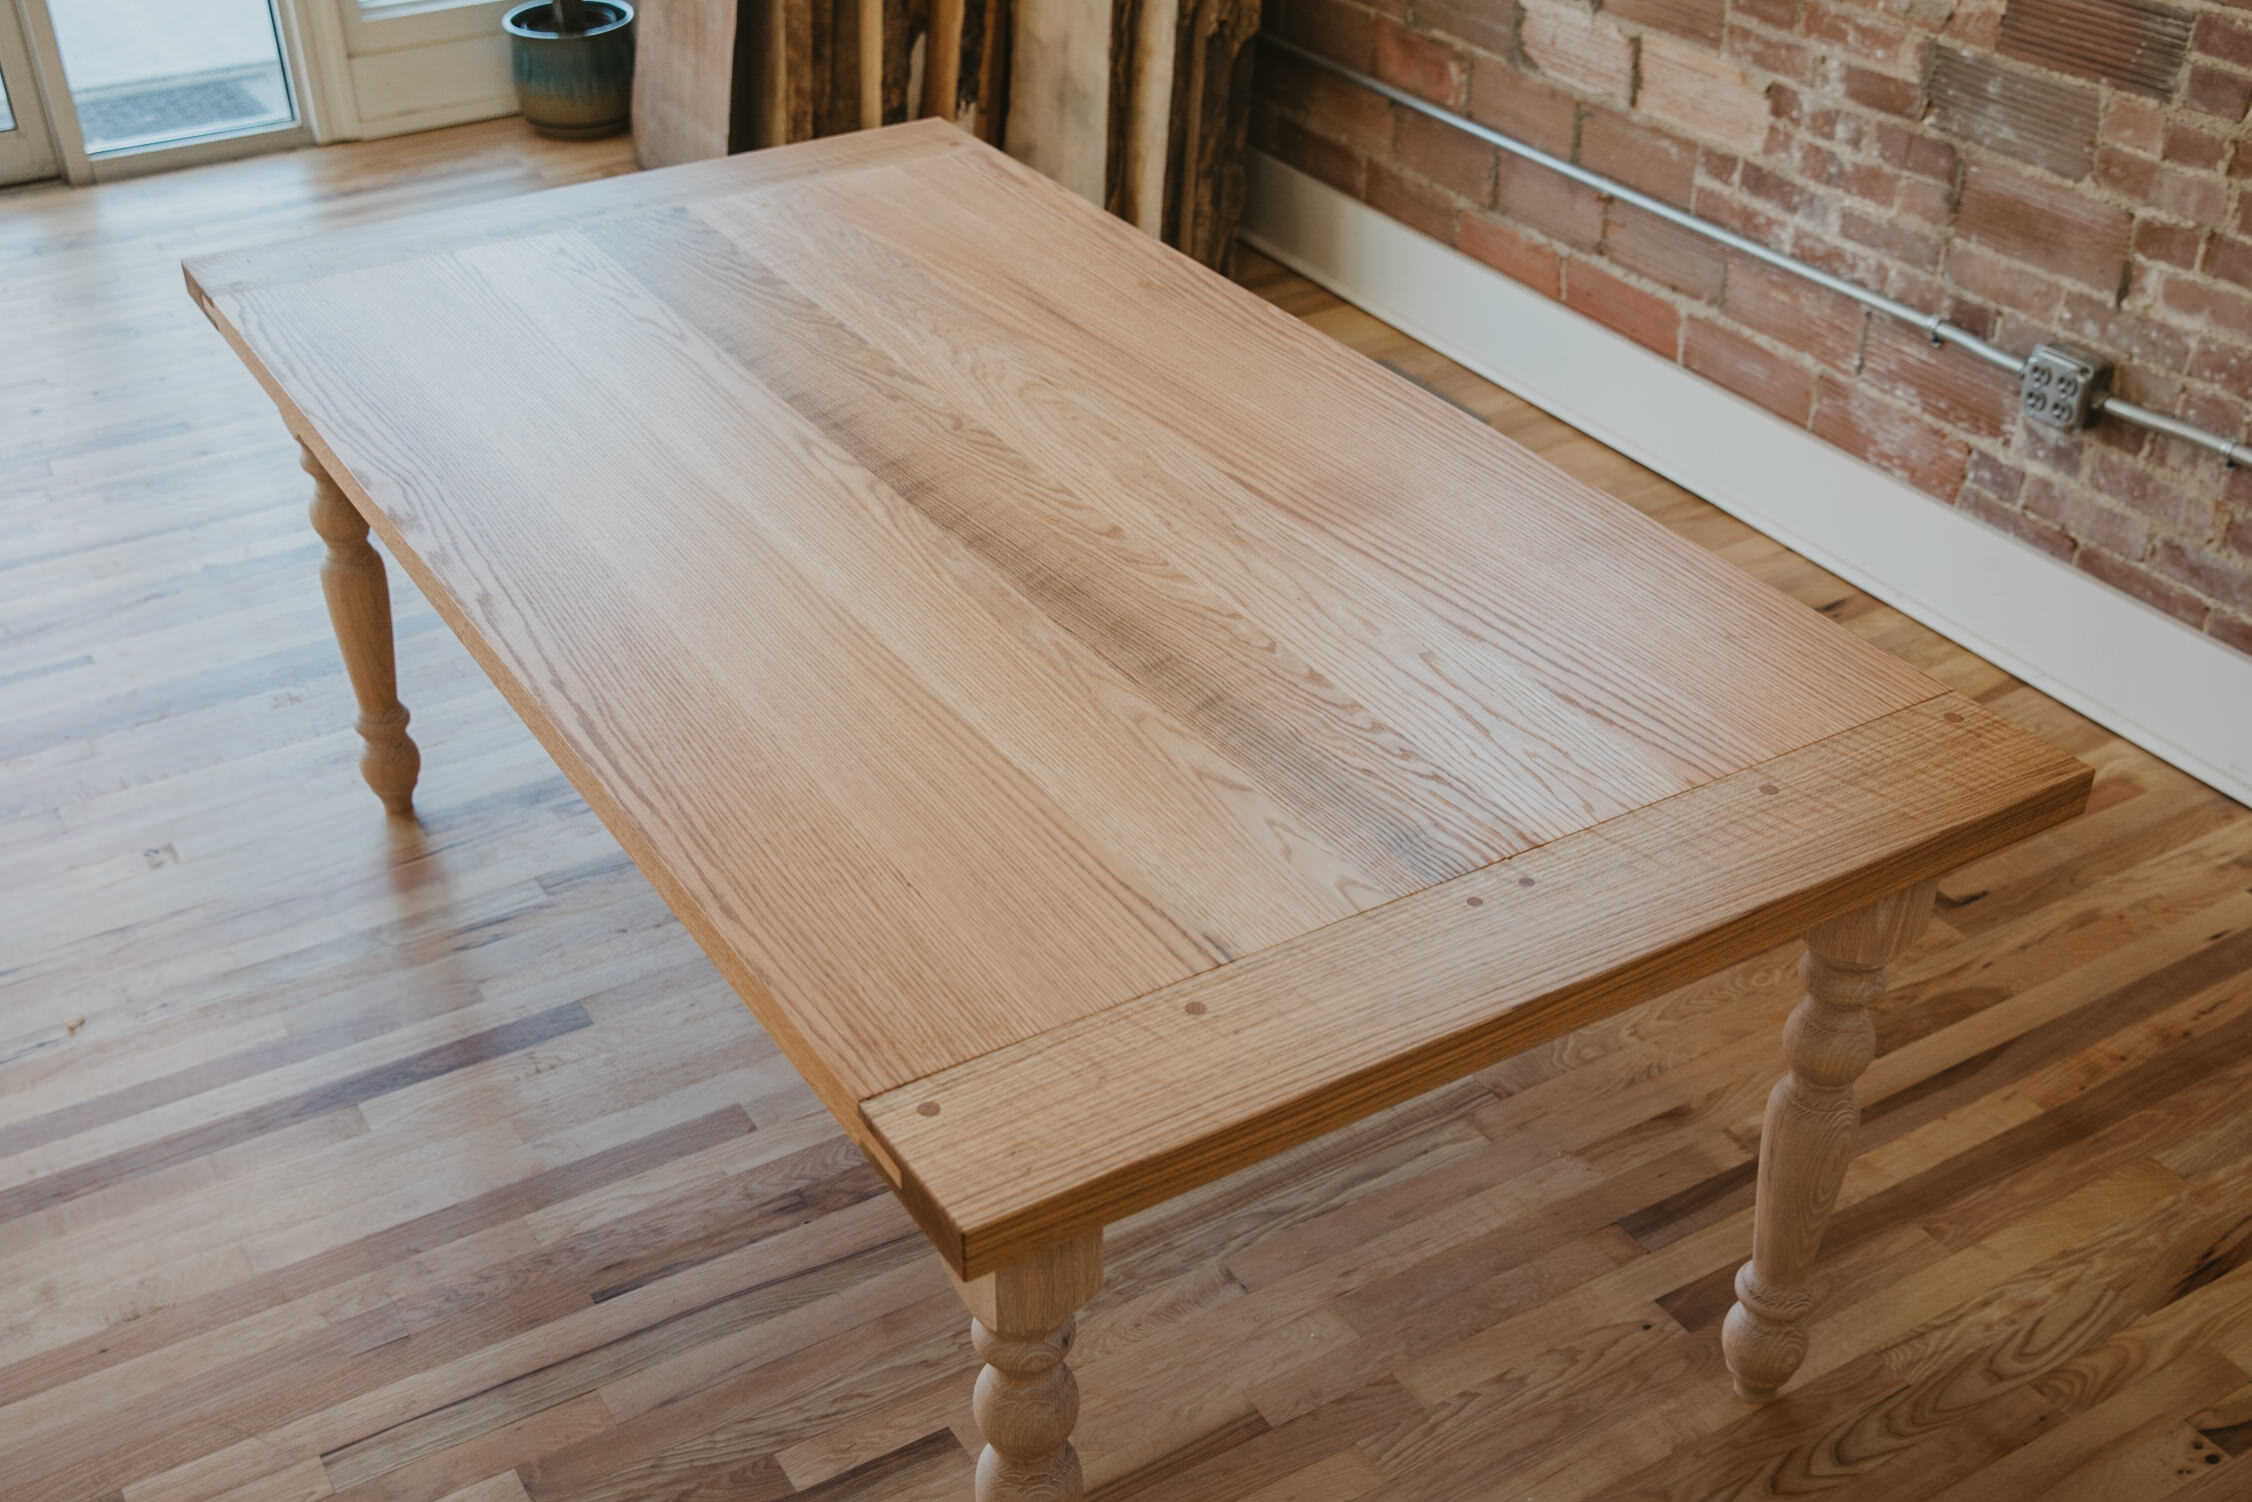 Big_tooth_Co-custom furniture maker_southern charm_farm_table_benches -8.jpg